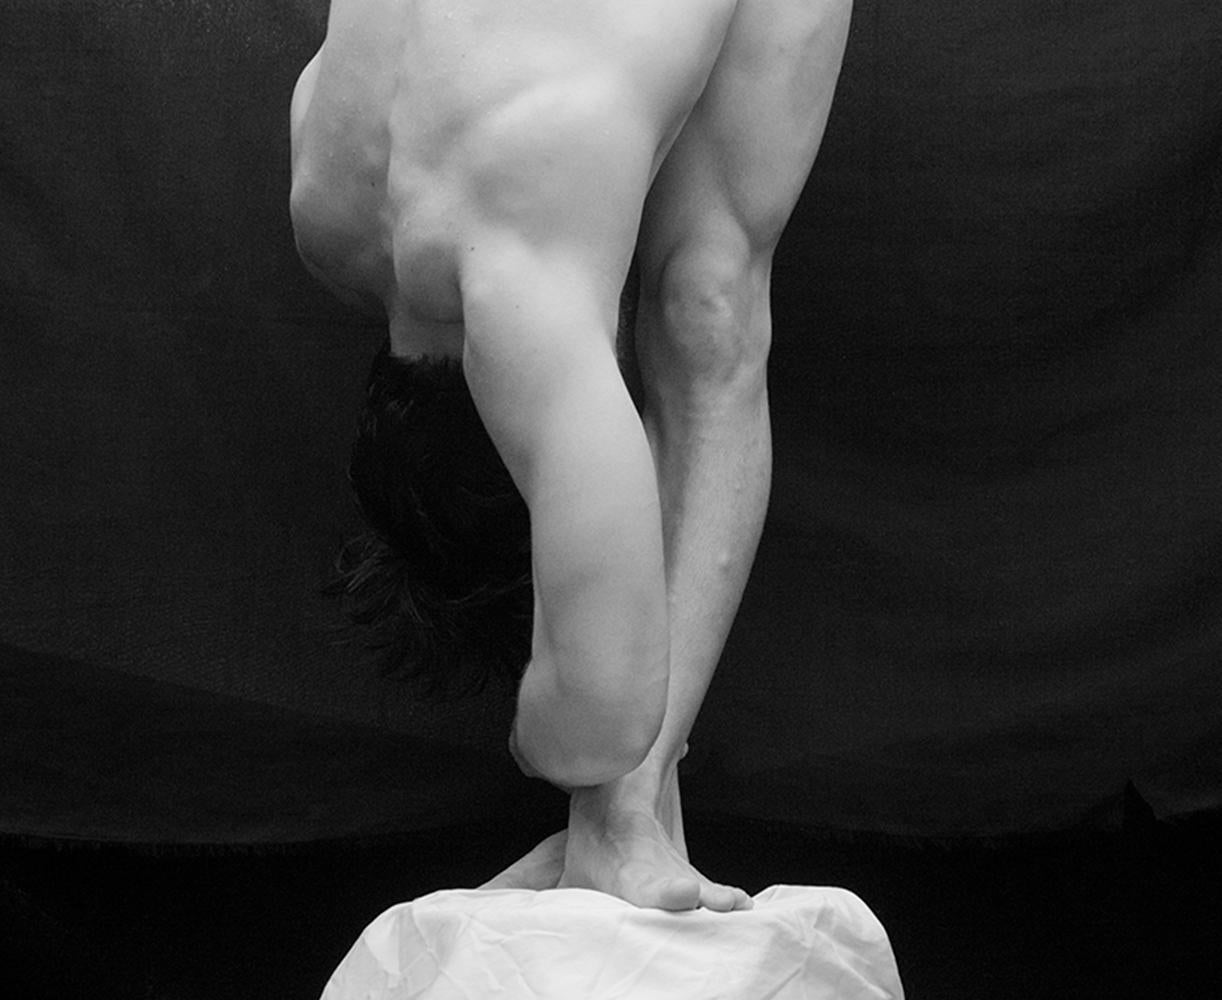 Acto Uno, From the series Acto Uno. Male Nude Limited Edition B&W Photograph - Black Nude Photograph by Ricky Cohete